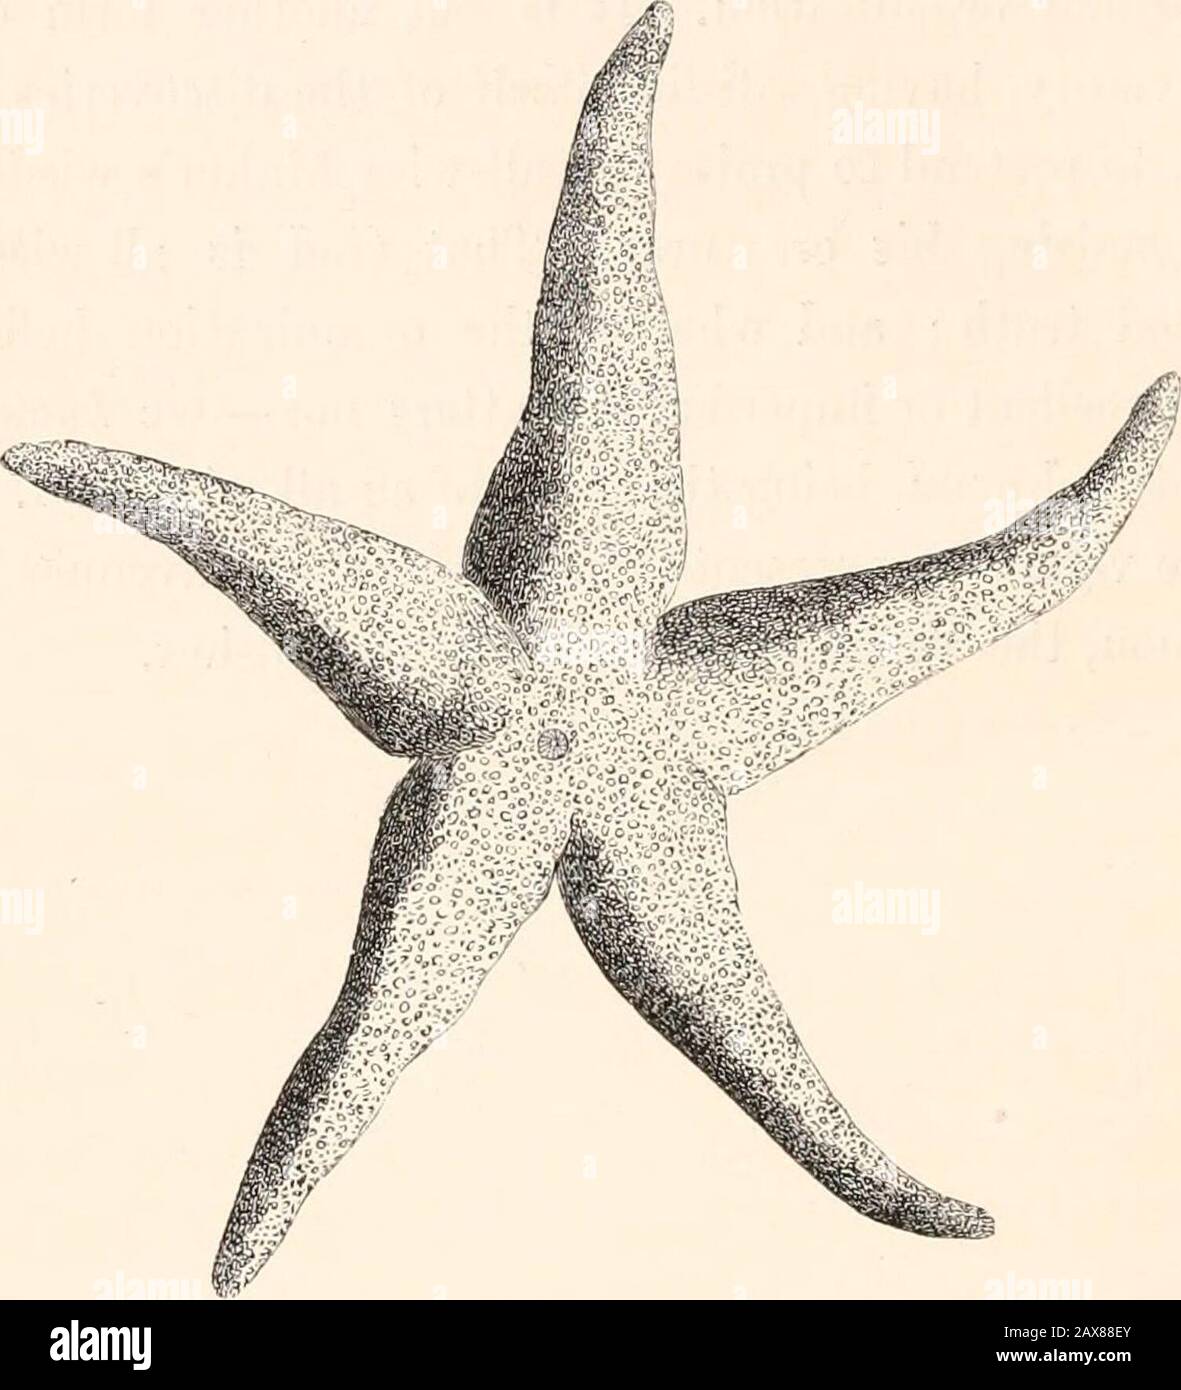 A history of British star-fishes, and other animals of the class Echinodermata . h2 100 SOLASTERIiE. ASTEMADJE. SOLASTERIJE.. Genus Cribella. Agassiz. Generic diameter.—Body stellate ; rays rounded, covered, as well as the disk,with spiniferous tubercles; intermediate spaces porous ; avenues bordered by twosets of spines ; suckers biserial. EYED CRIBELLA. Cribella oculata. Pennant. Specific Character.—Rays and disk irregularly covered with oblong reticulatingspiniferous tubercles. Pentadactylosaster oculatus, Link, p. 31, t. xxxvi. f. 62. Asterias oculata, Pennant, Brit. Zool. IV. p. 61, t. xx Stock Photo